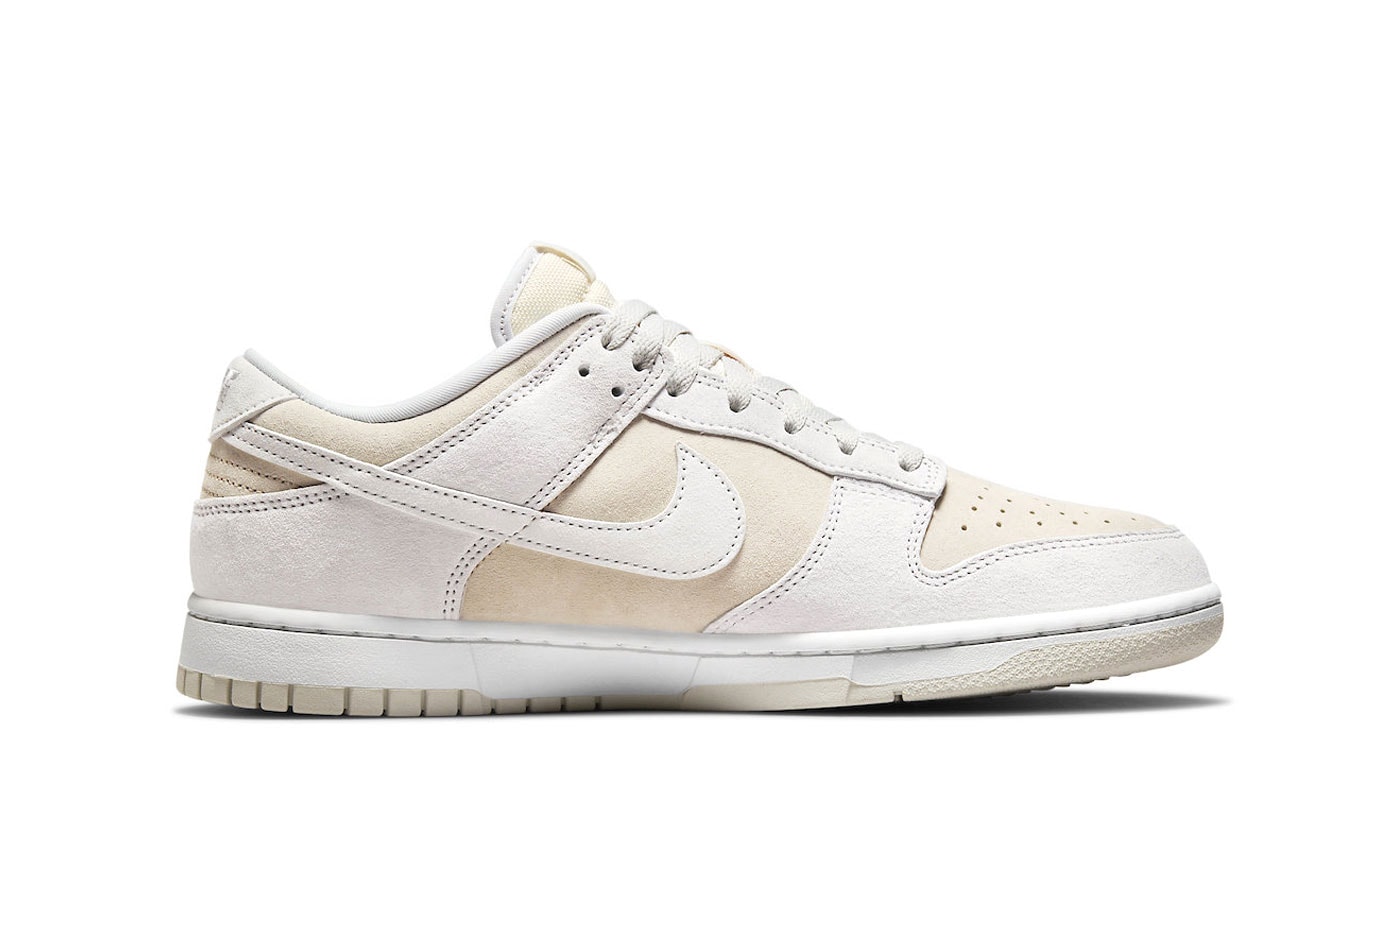 nike dunk low vast grey summit white pearl white DD8338-001 100 usd price date 2022 release info